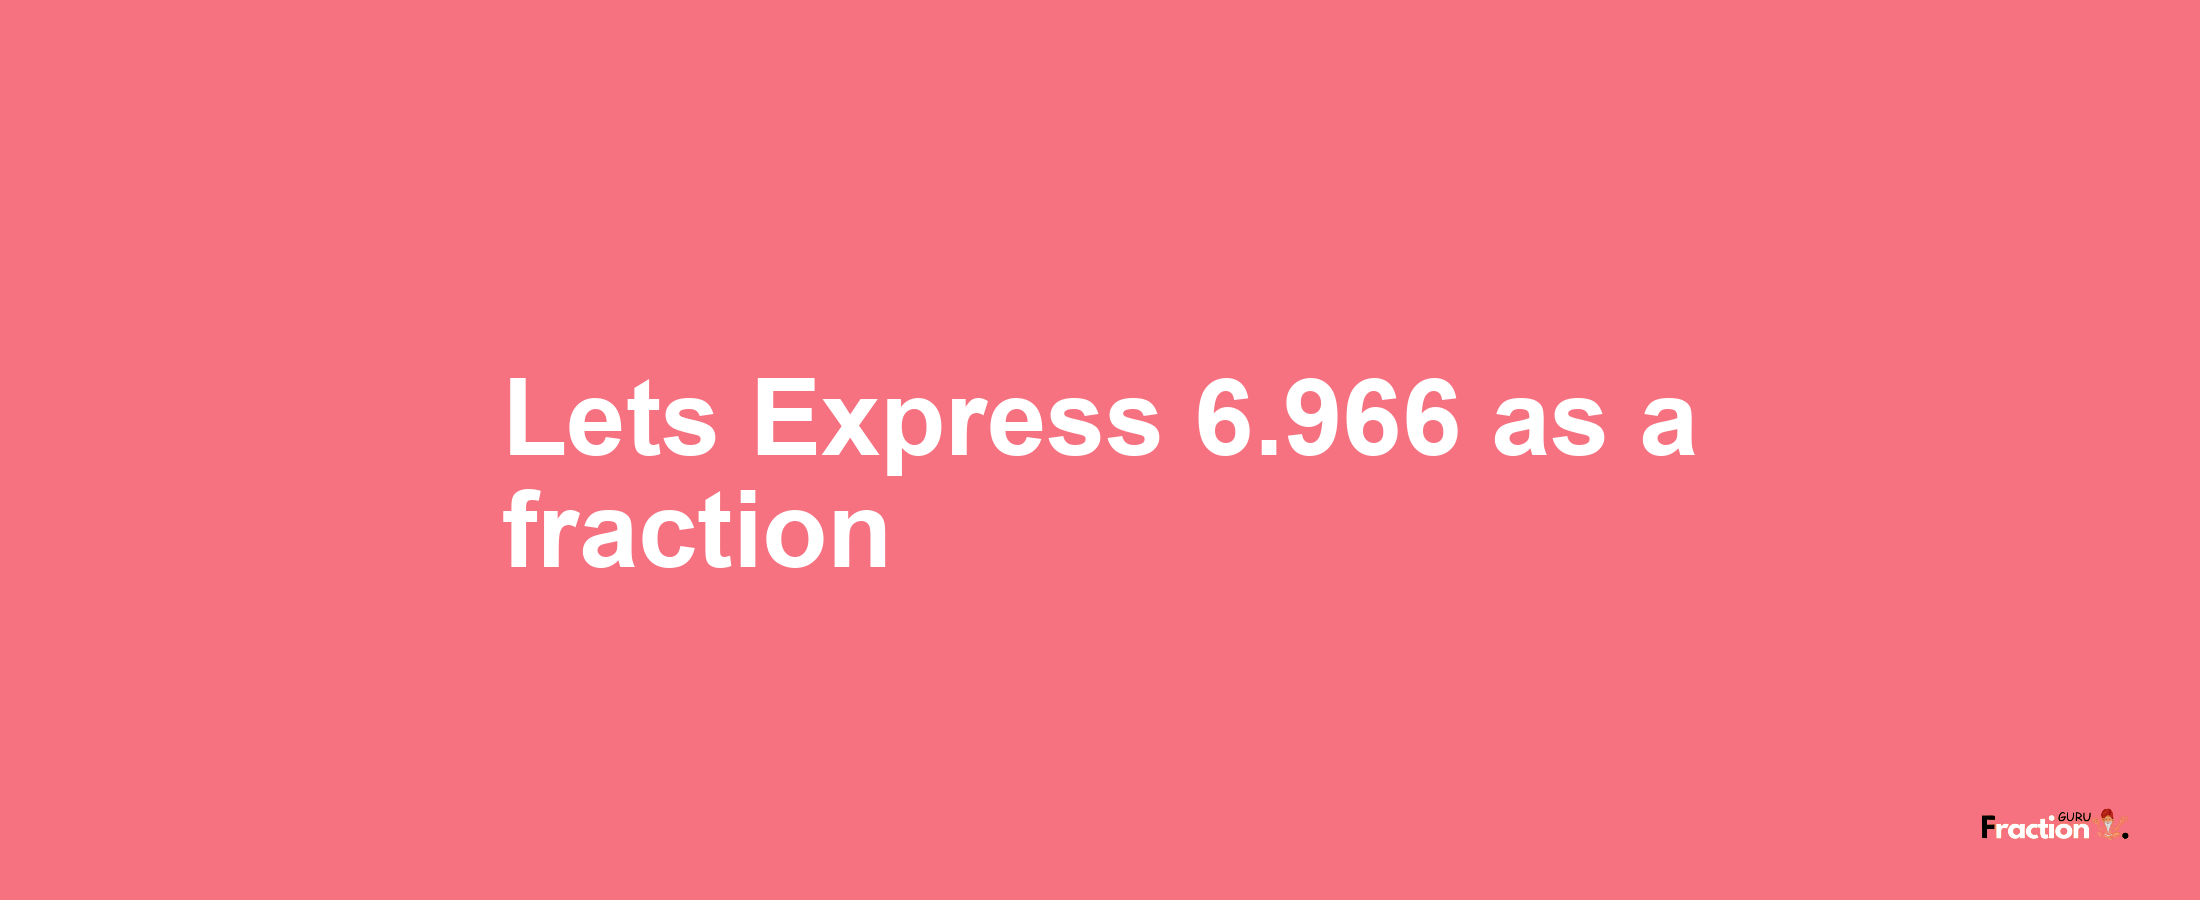 Lets Express 6.966 as afraction